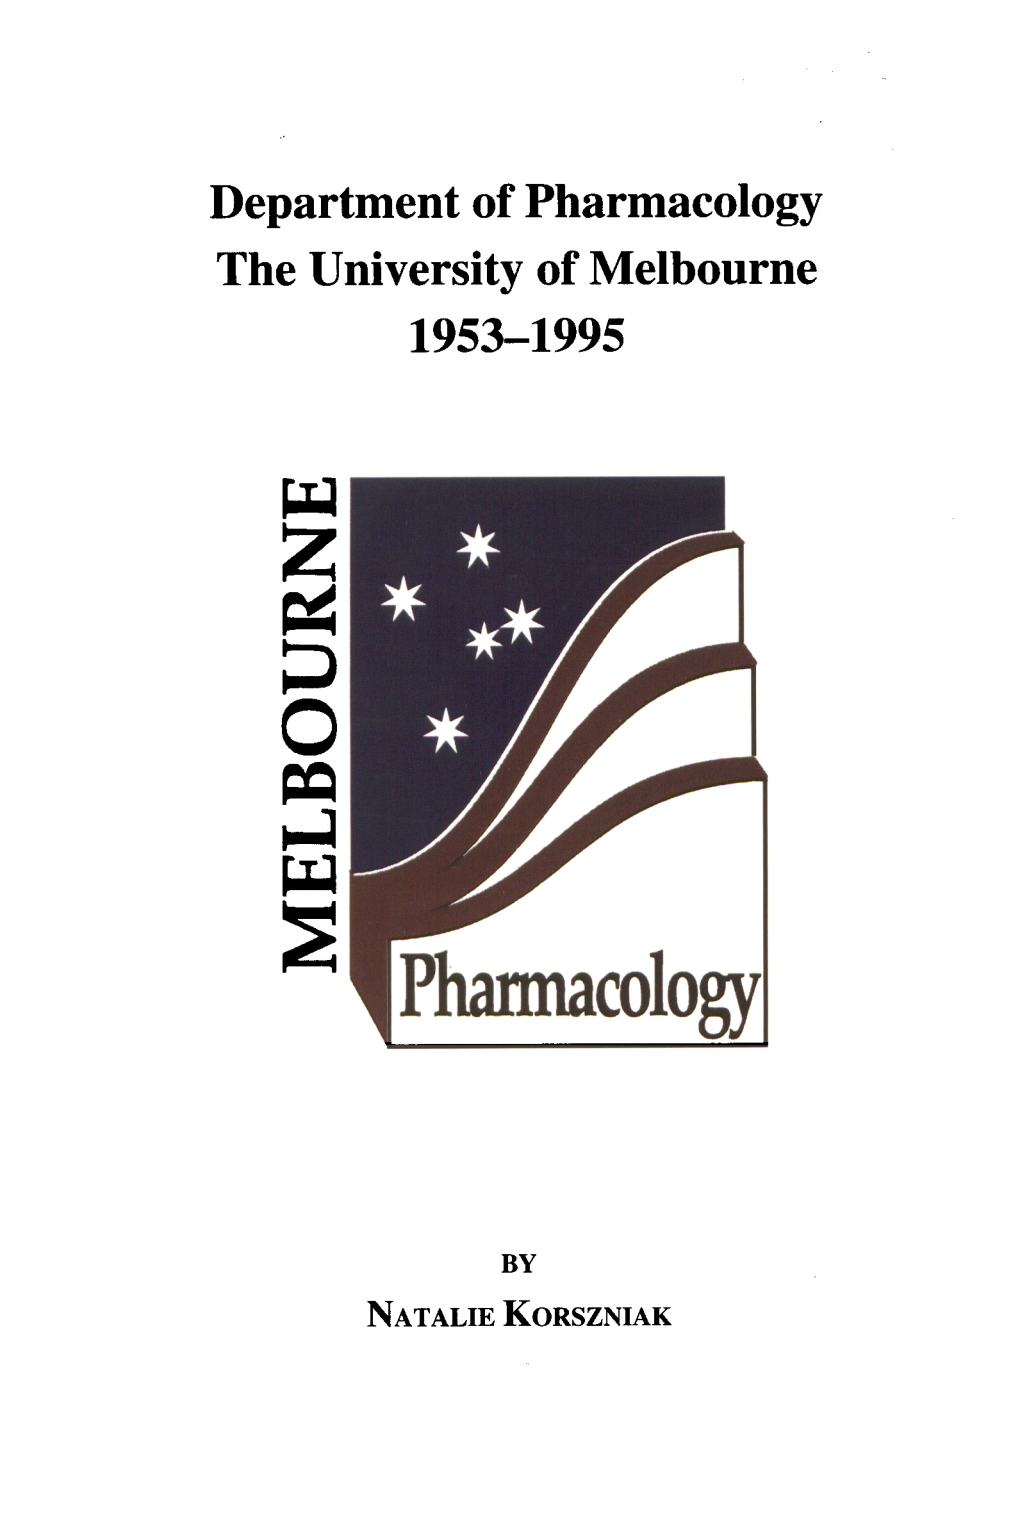 Department of Pharmacology the University of Melbourne 1953-1995